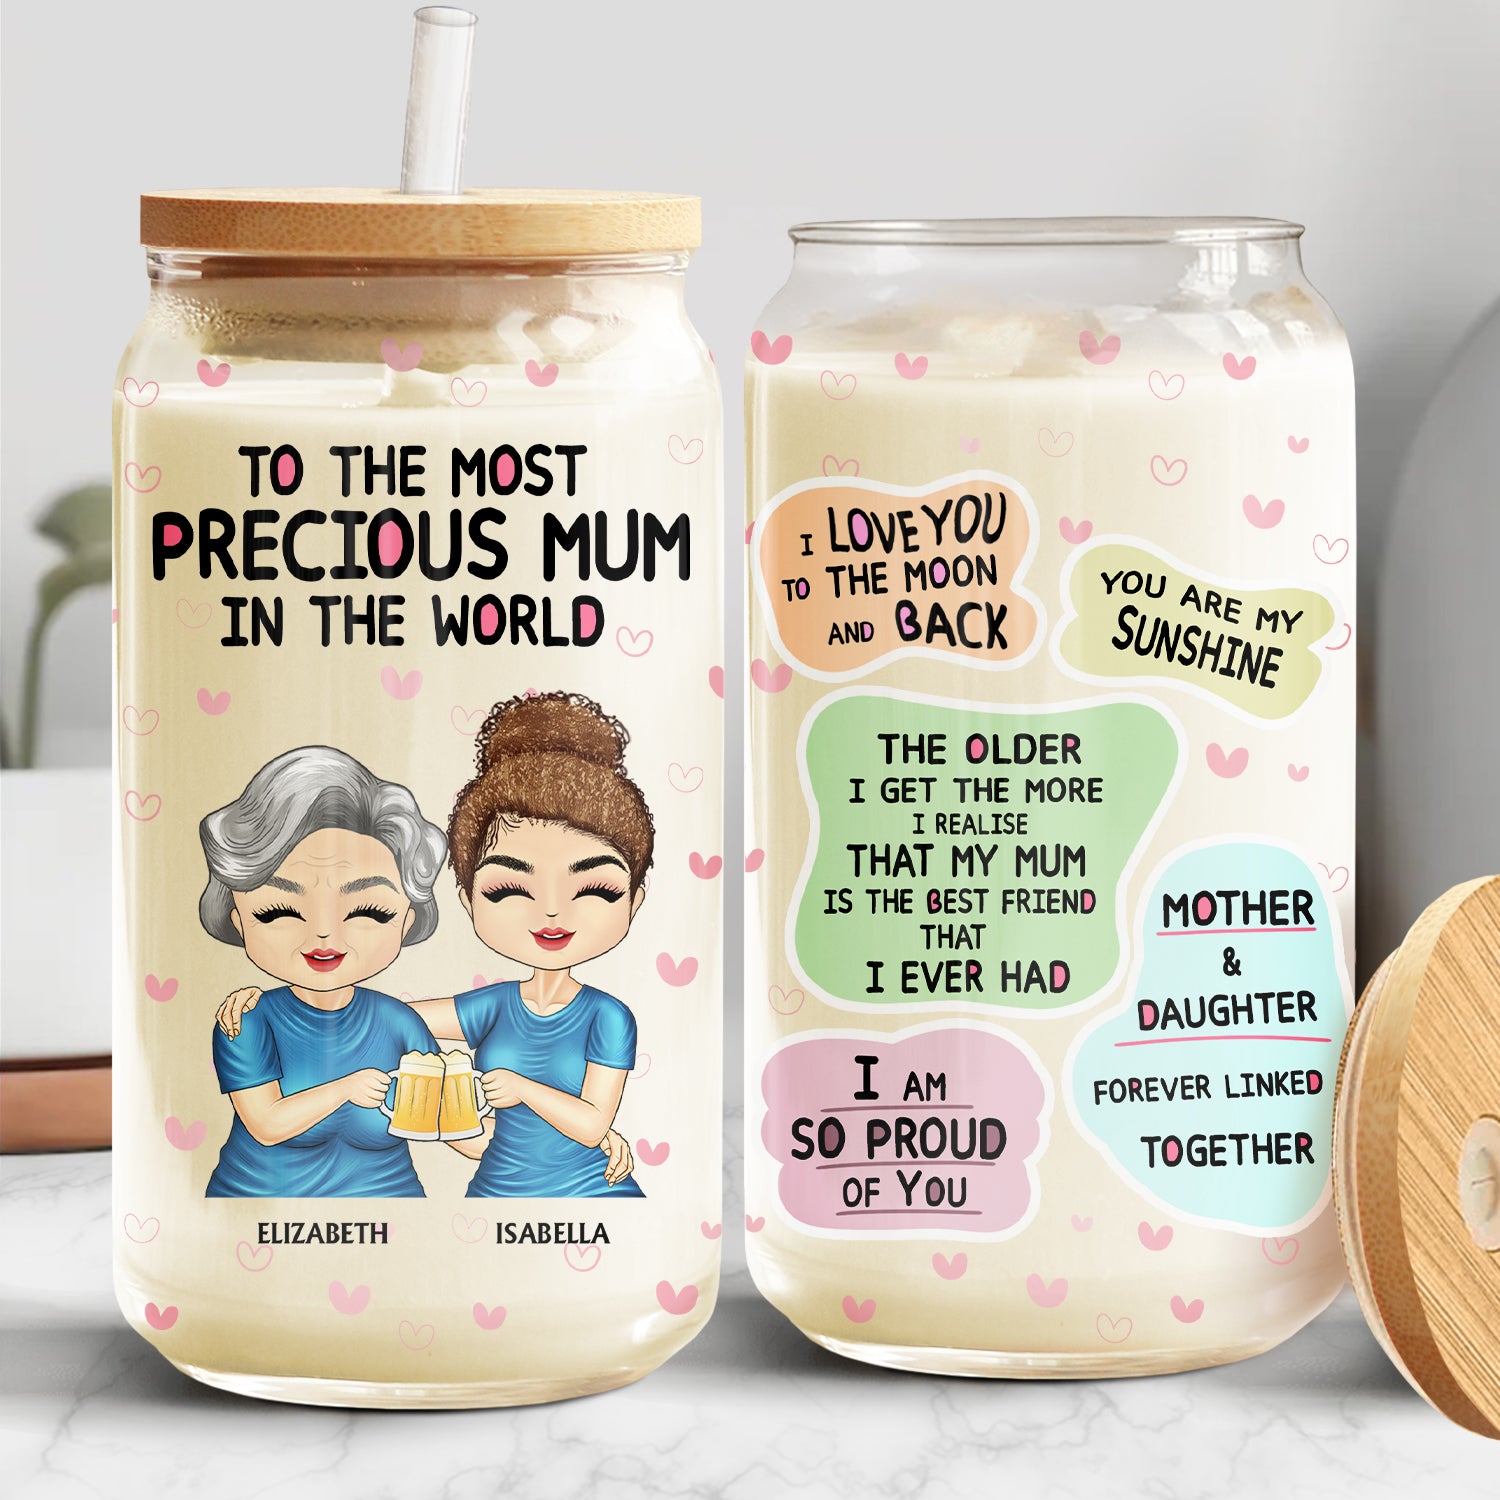 To The Most Precious Mum In The World - Loving Gift For Mom, Mother - Personalized Clear Glass Can